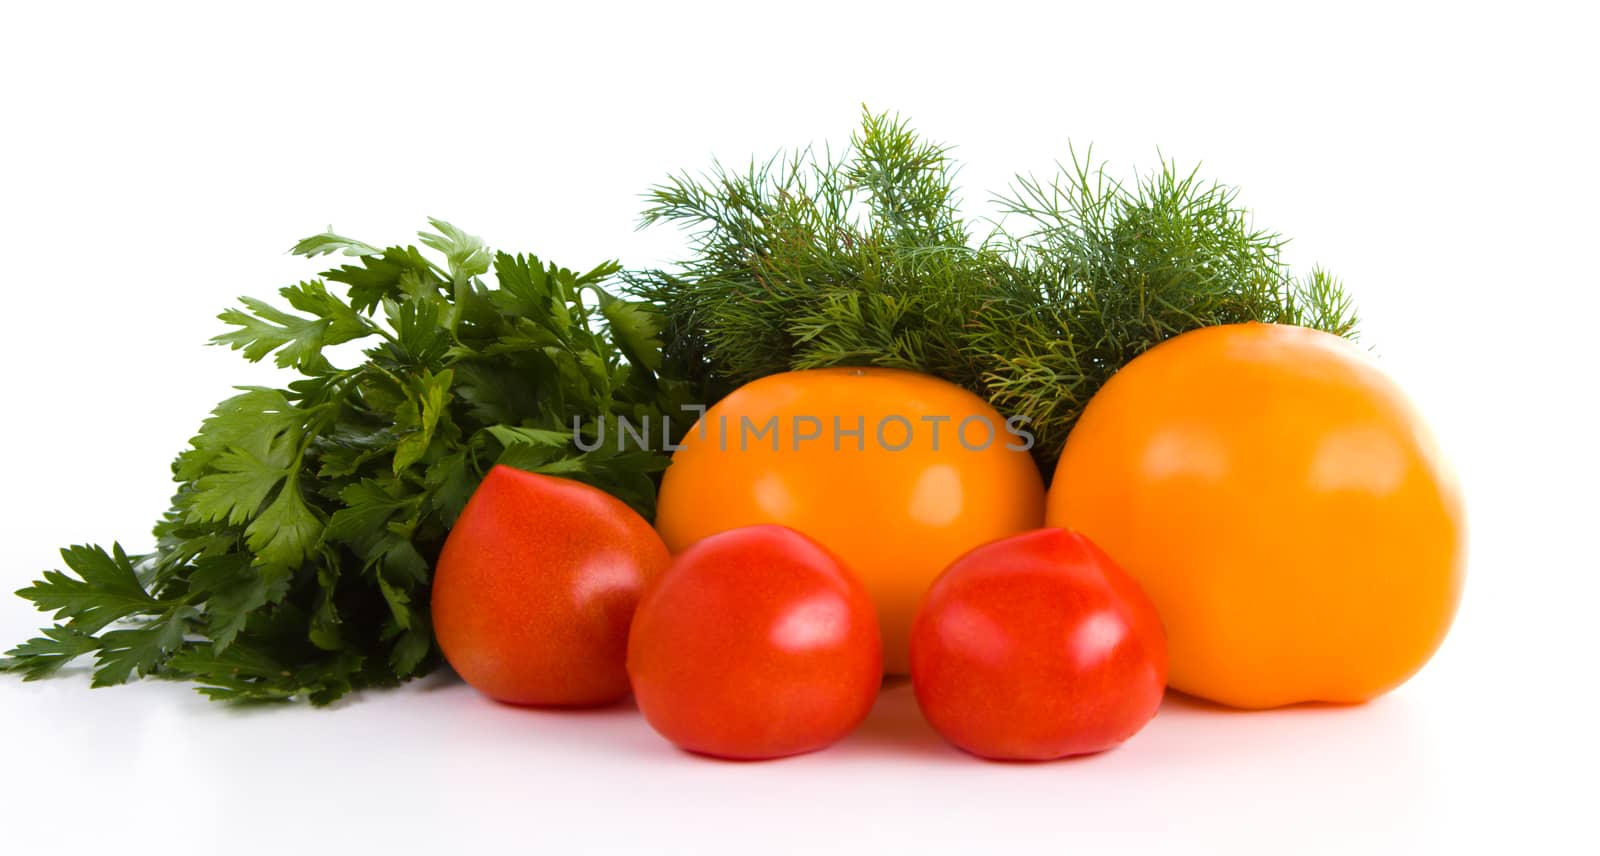 Red and yellow tomatoes with dill and parsley isolated on white background